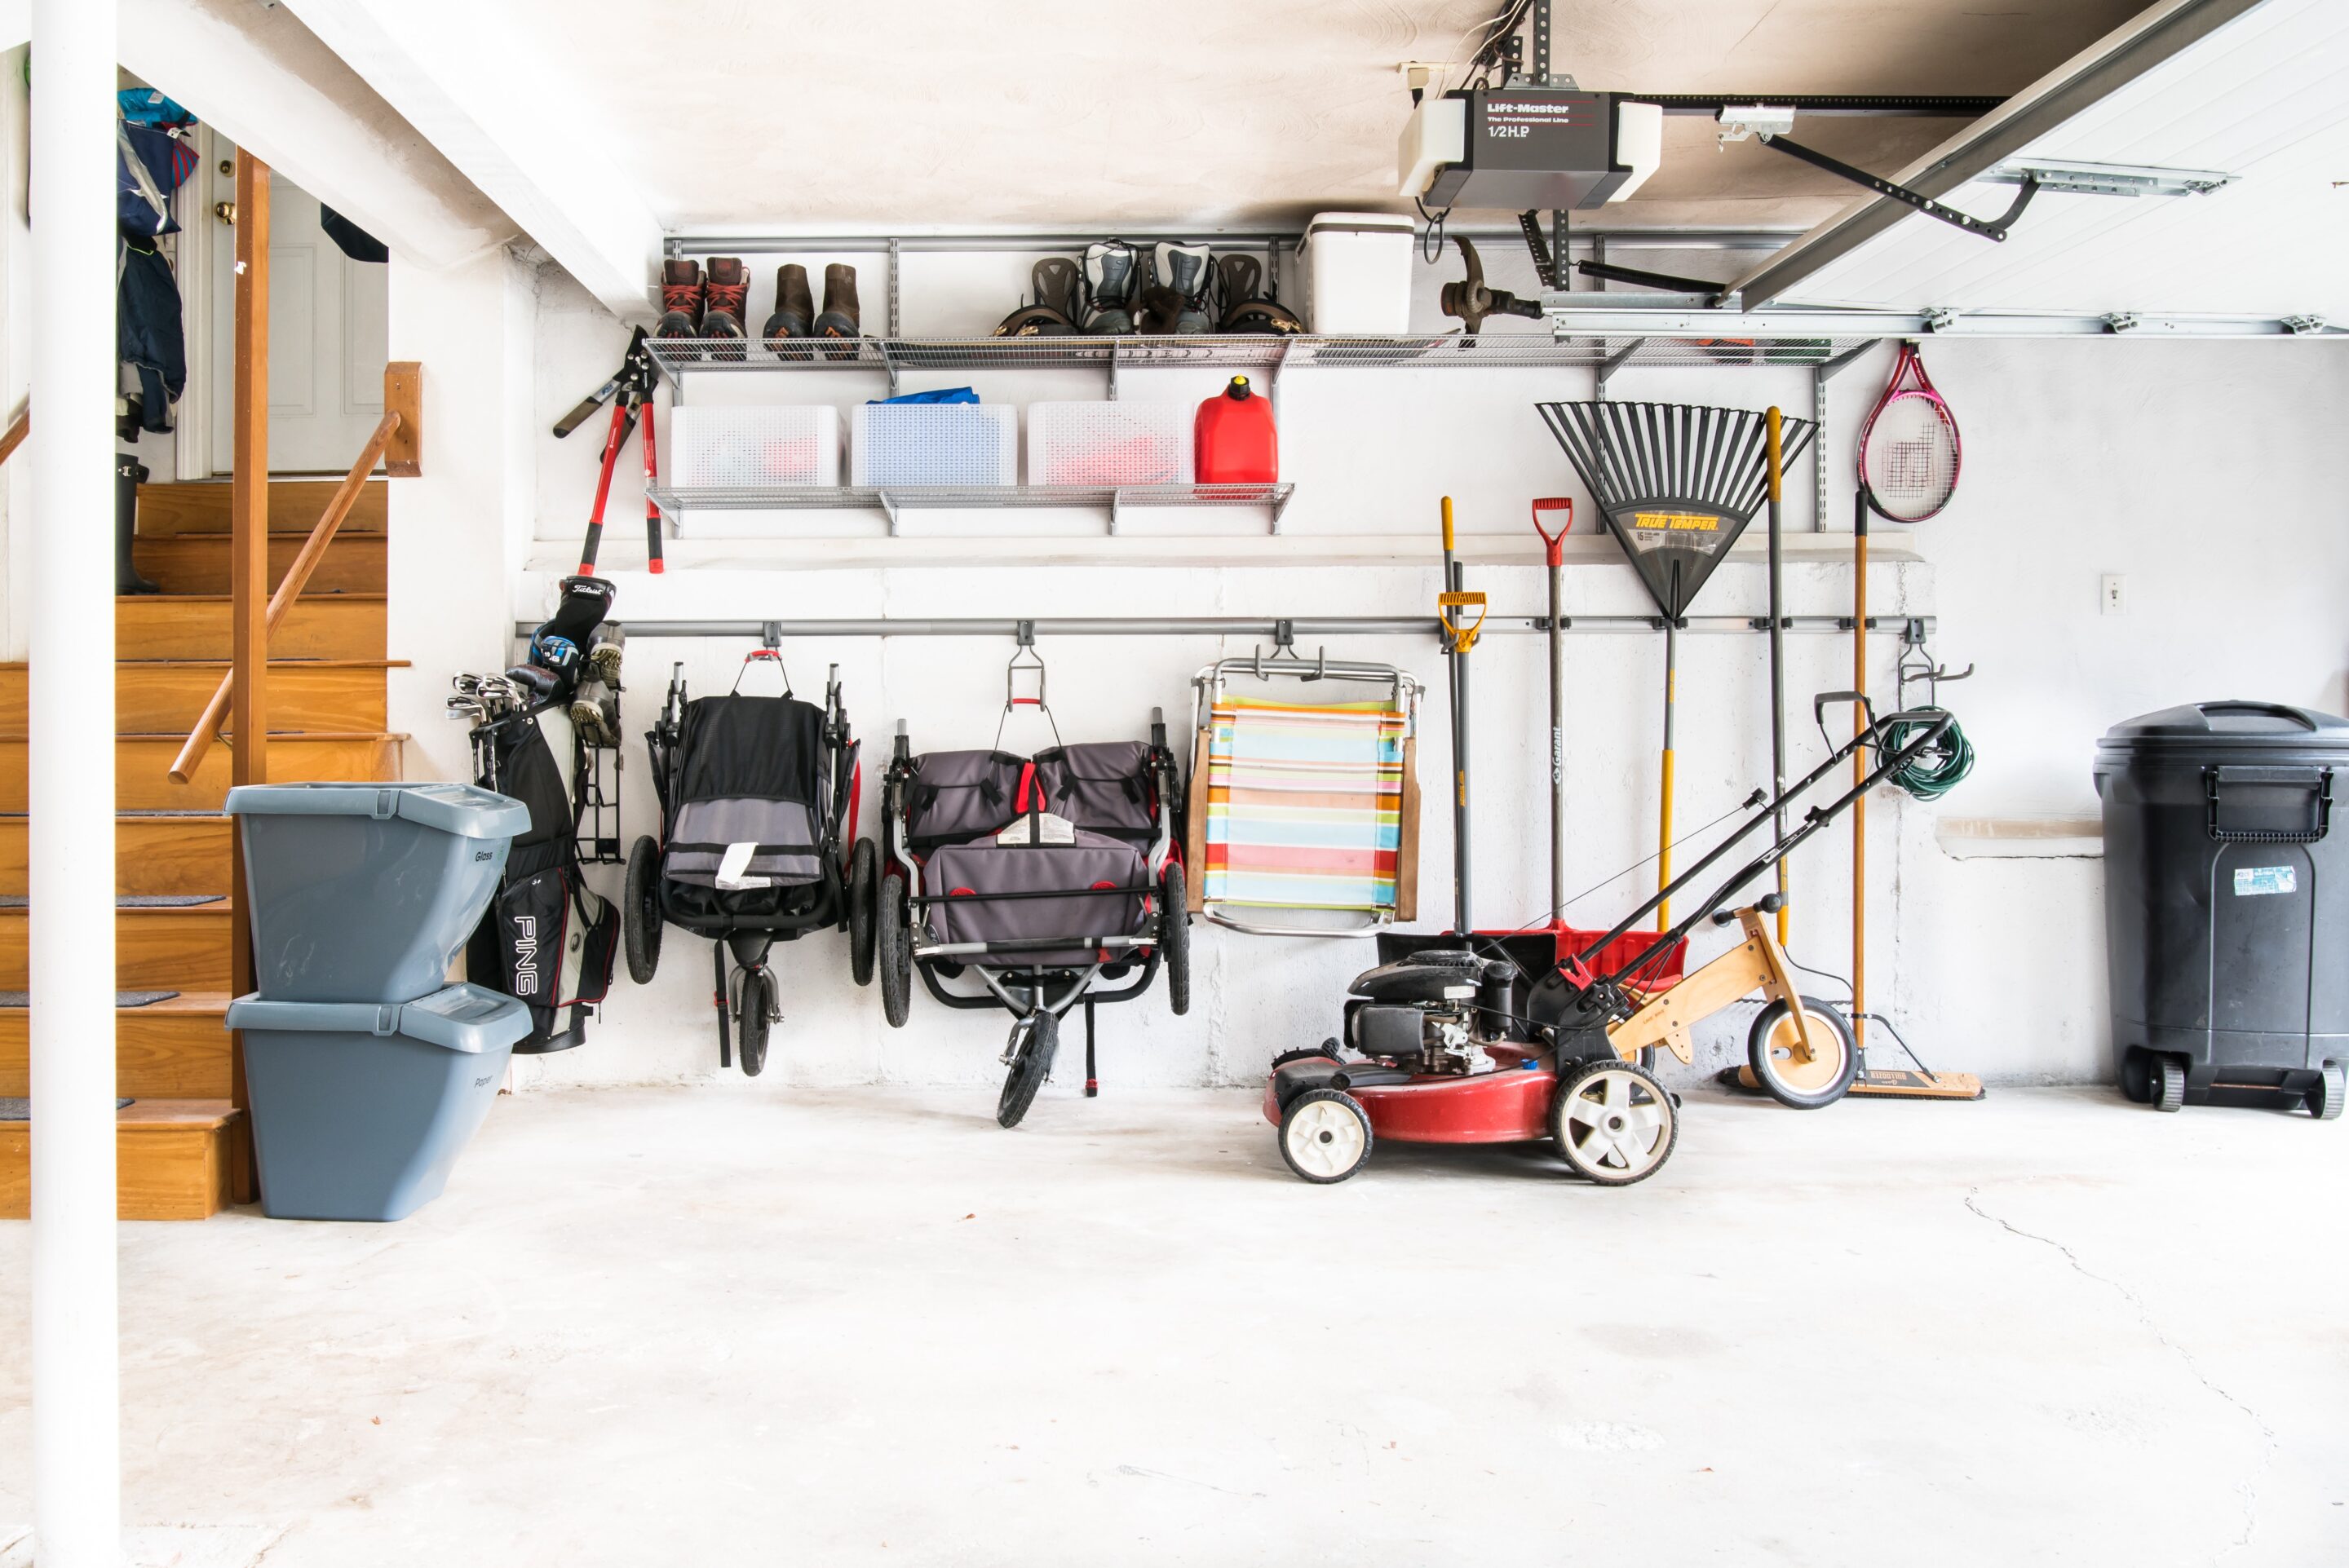 Get clutter under control with these clever garage organization and storage ideas